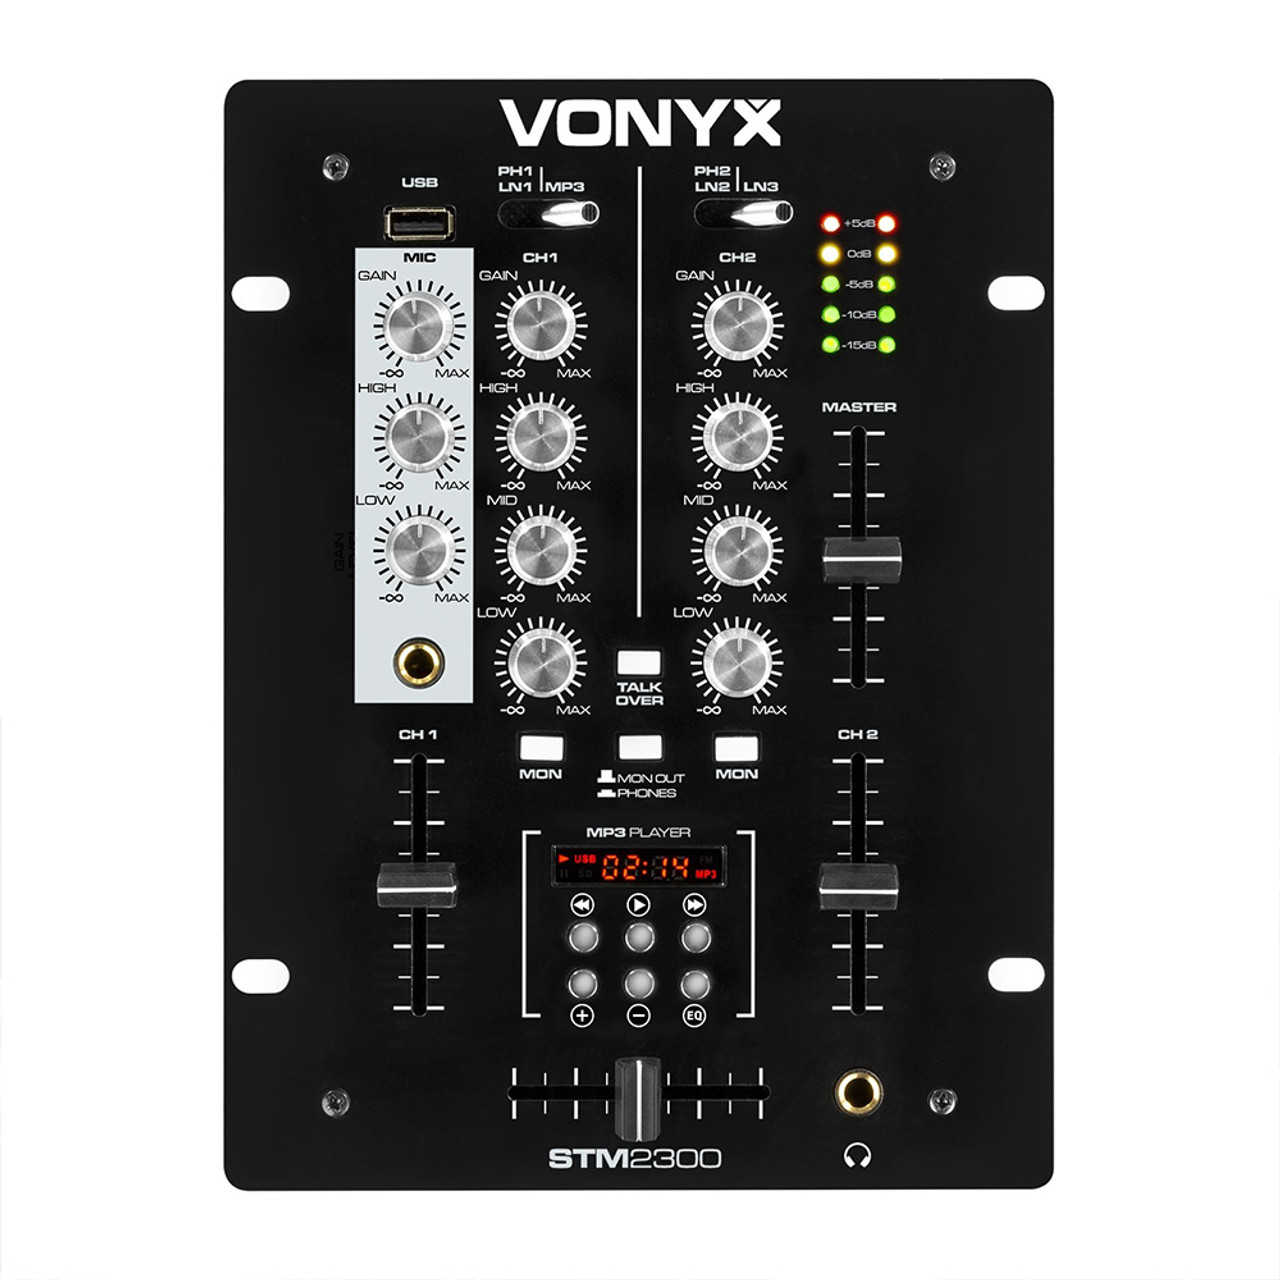 Vonyx STM2300 2-Channel DJ Mixer with USB/MP3 Player